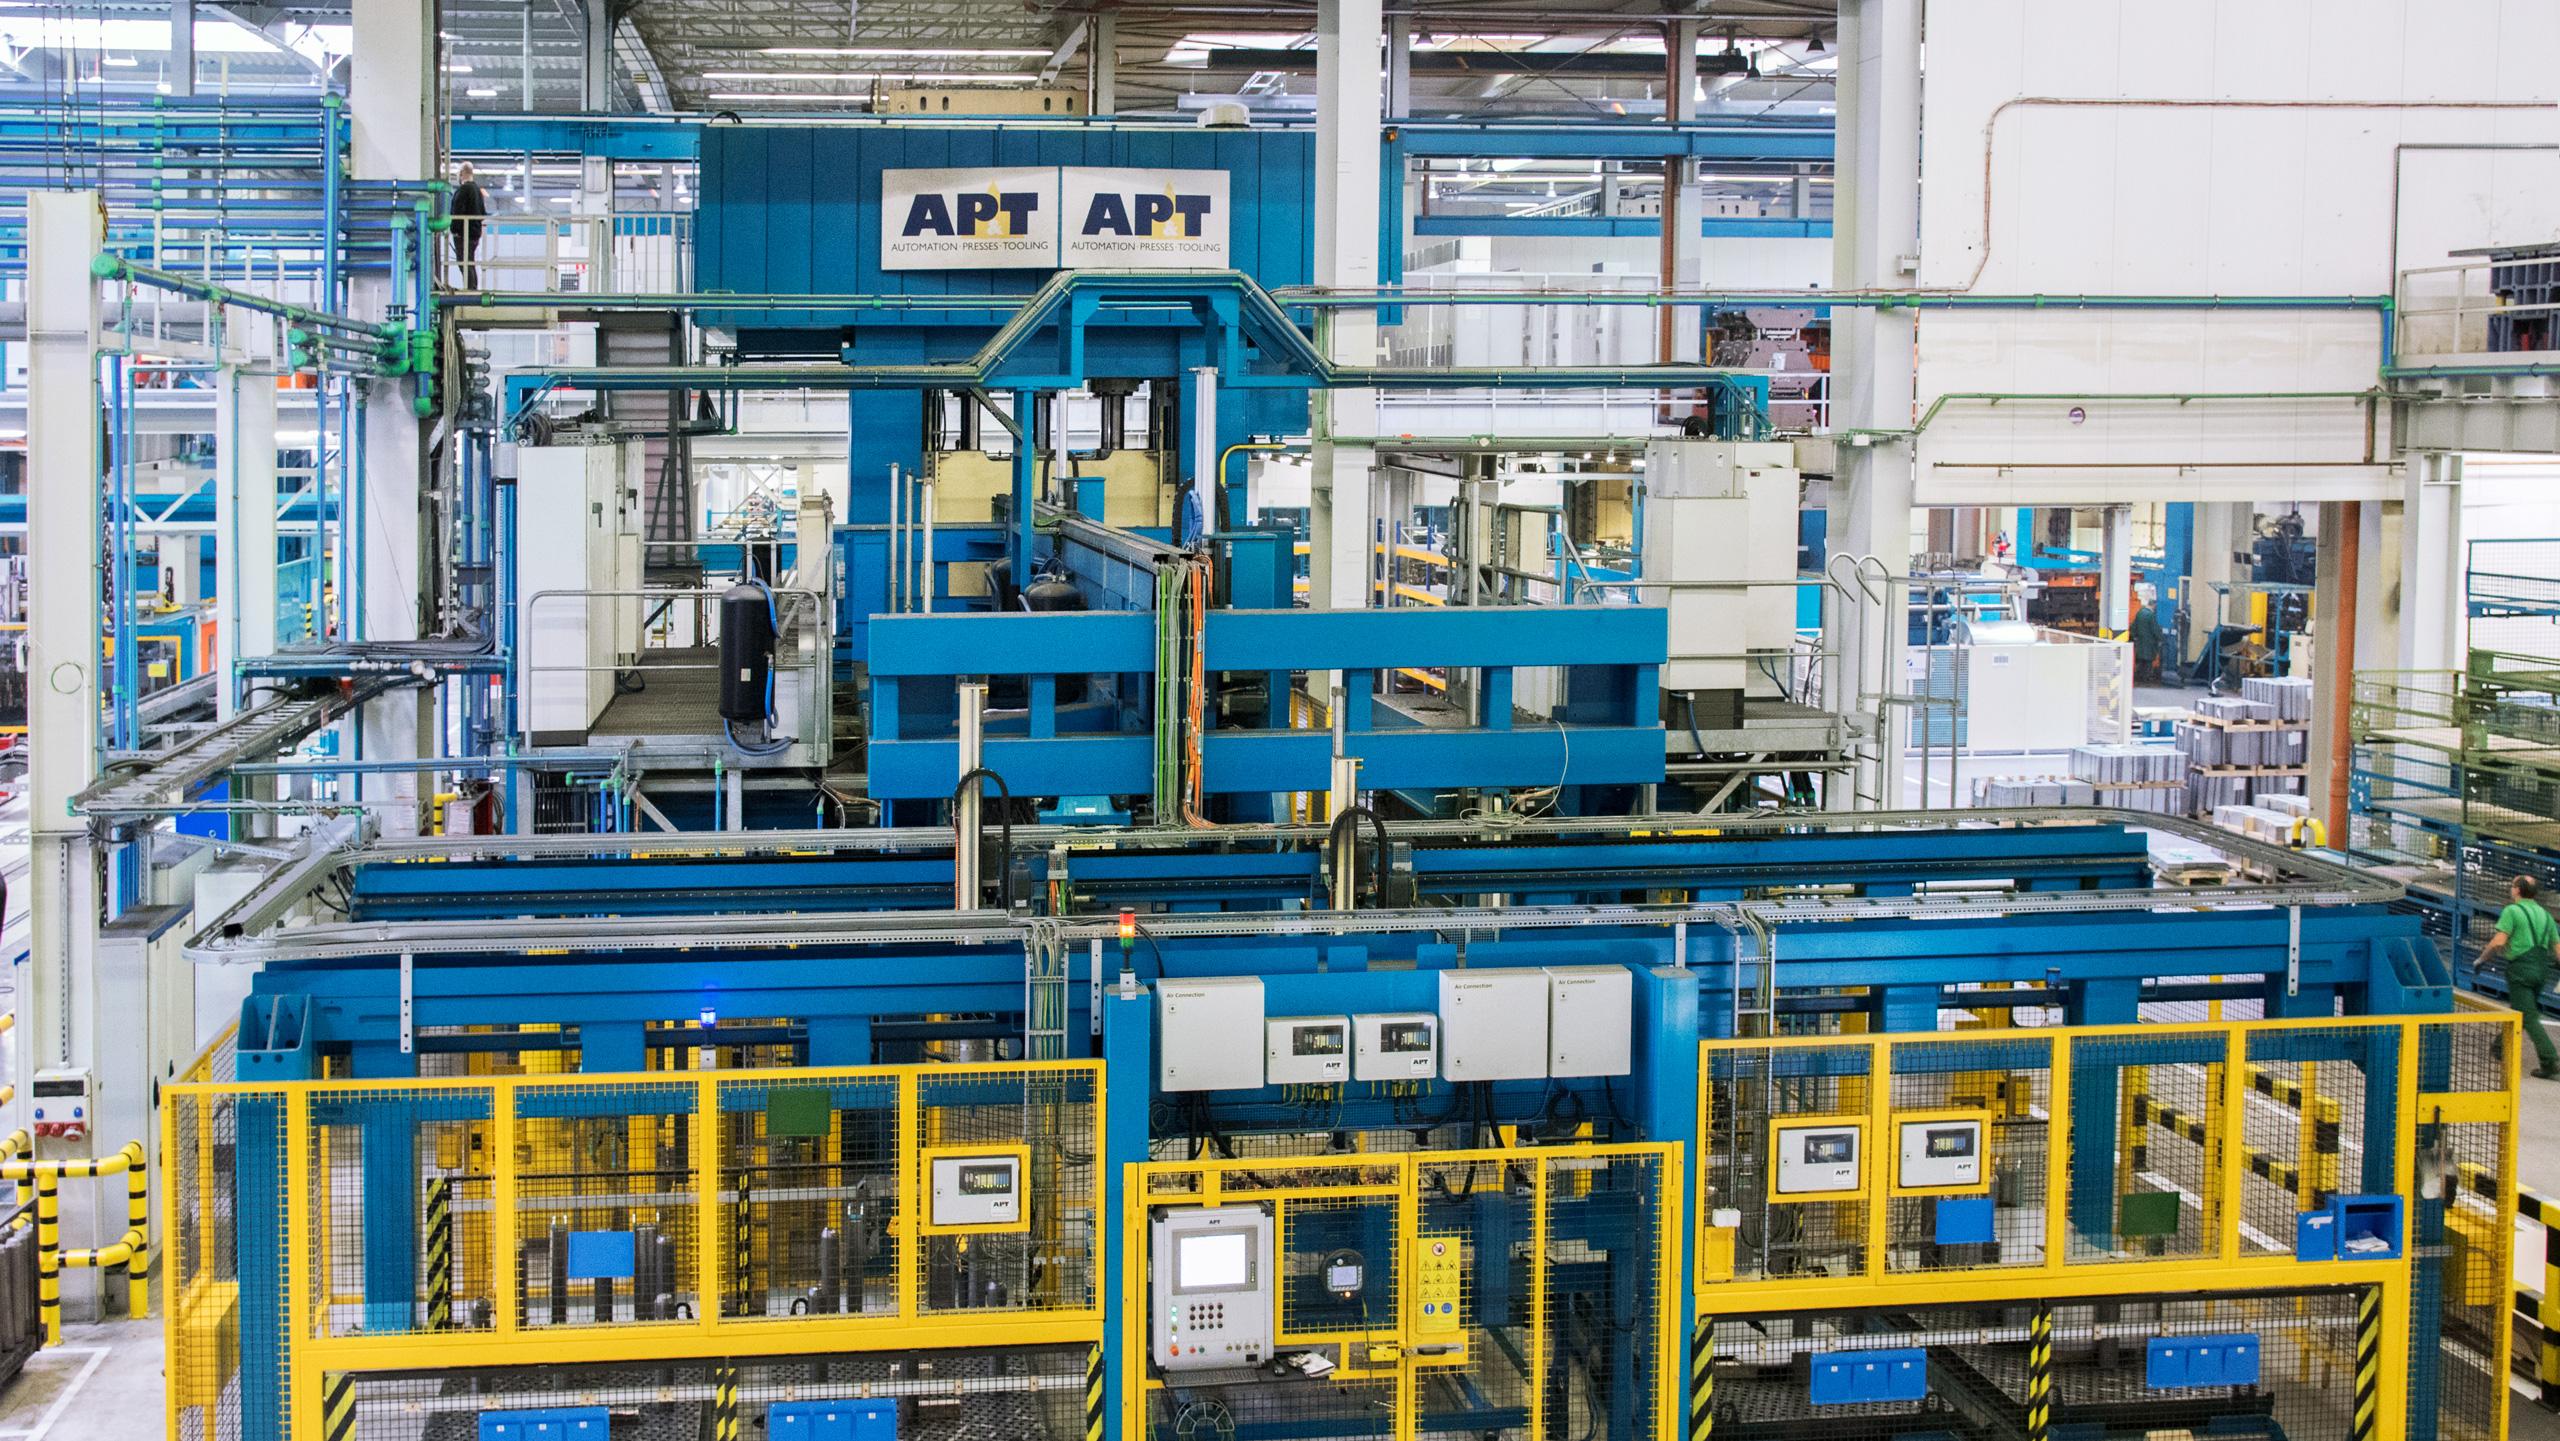 So far AP&T has installed three complete press hardening lines at Gedia’s facilities in Germany and Poland.